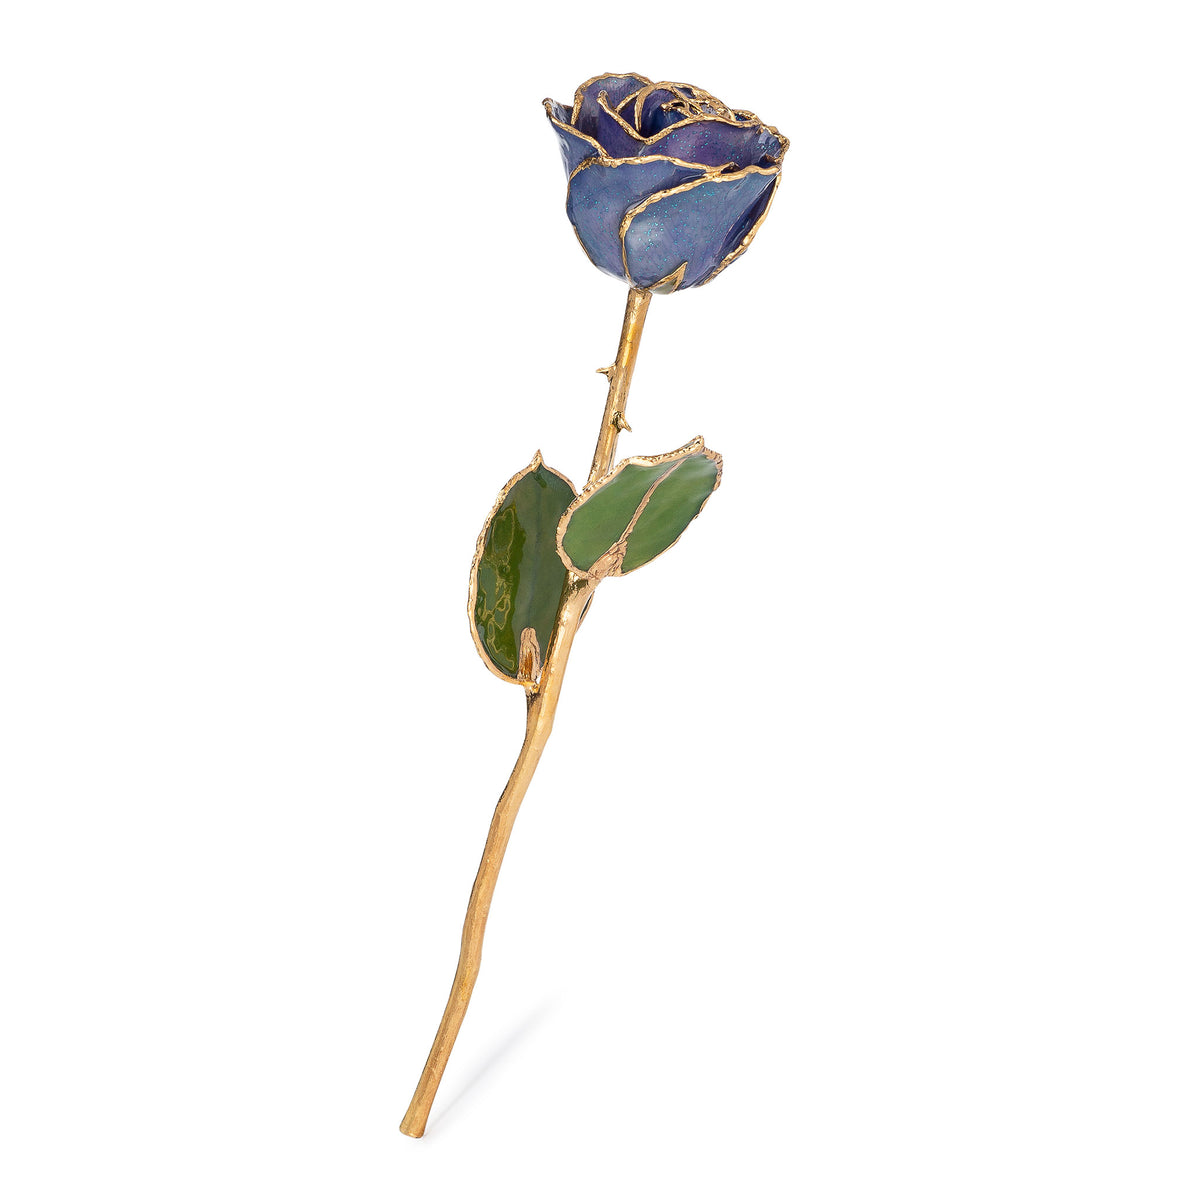 24K Gold Trimmed Forever Rose with Tanzanite (Purple, Lavender, and Blue color blend) Petals with Sapphire Blue Suspended Sparkles. View of Stem, Leaves, and Rose Petals and Showing Detail of Gold Trim